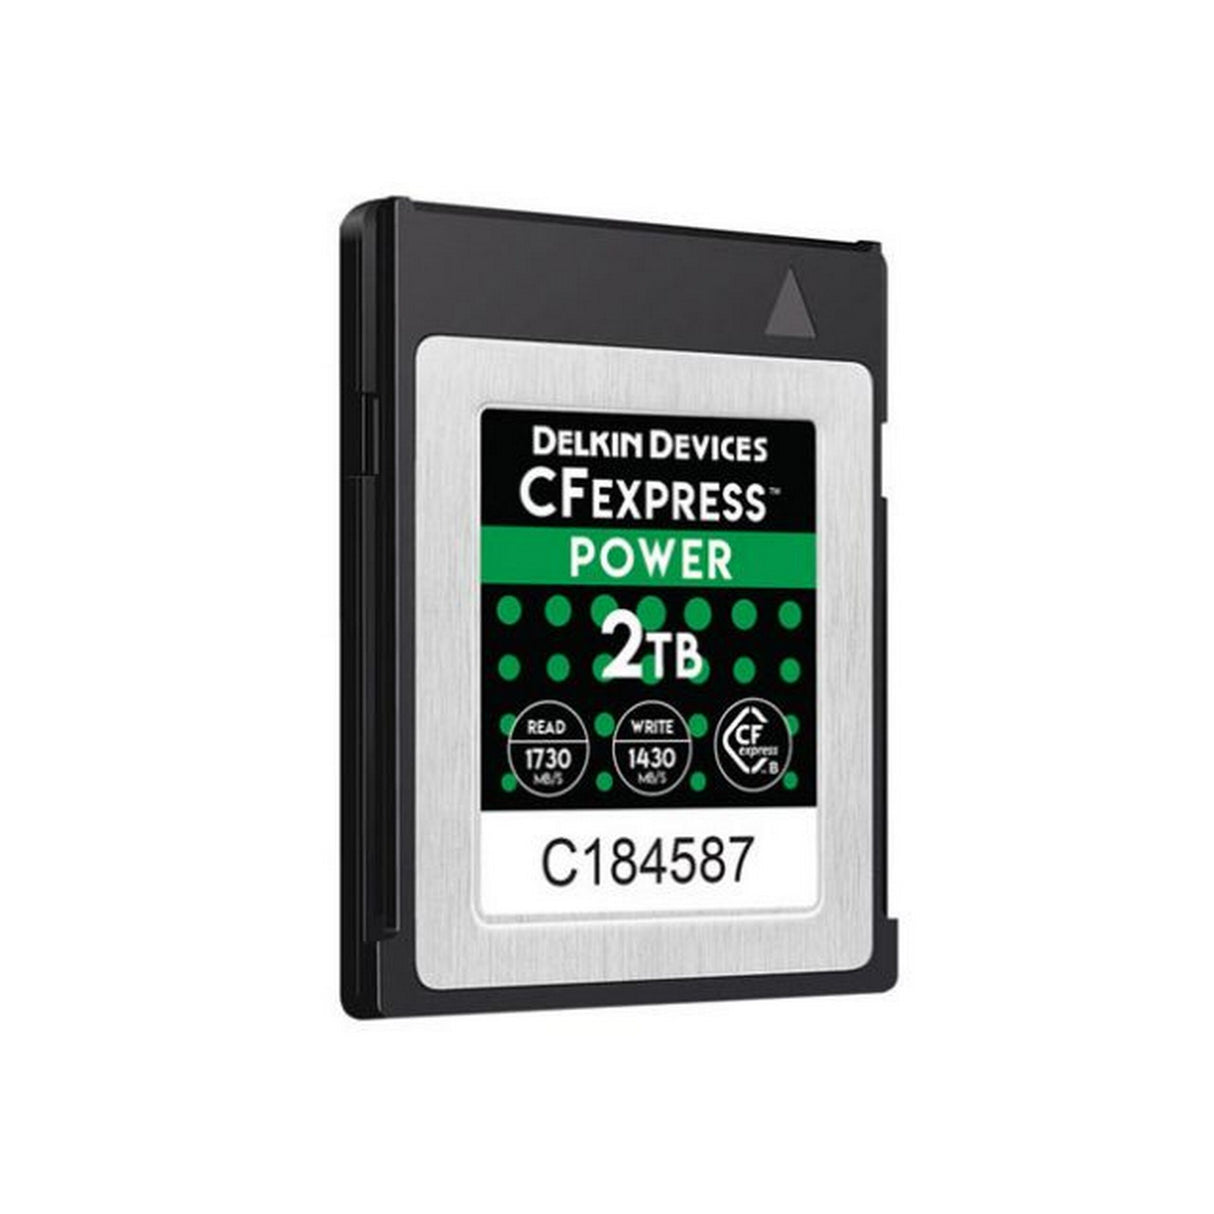 Delkin Devices POWER CFexpress Memory Card, 2TB